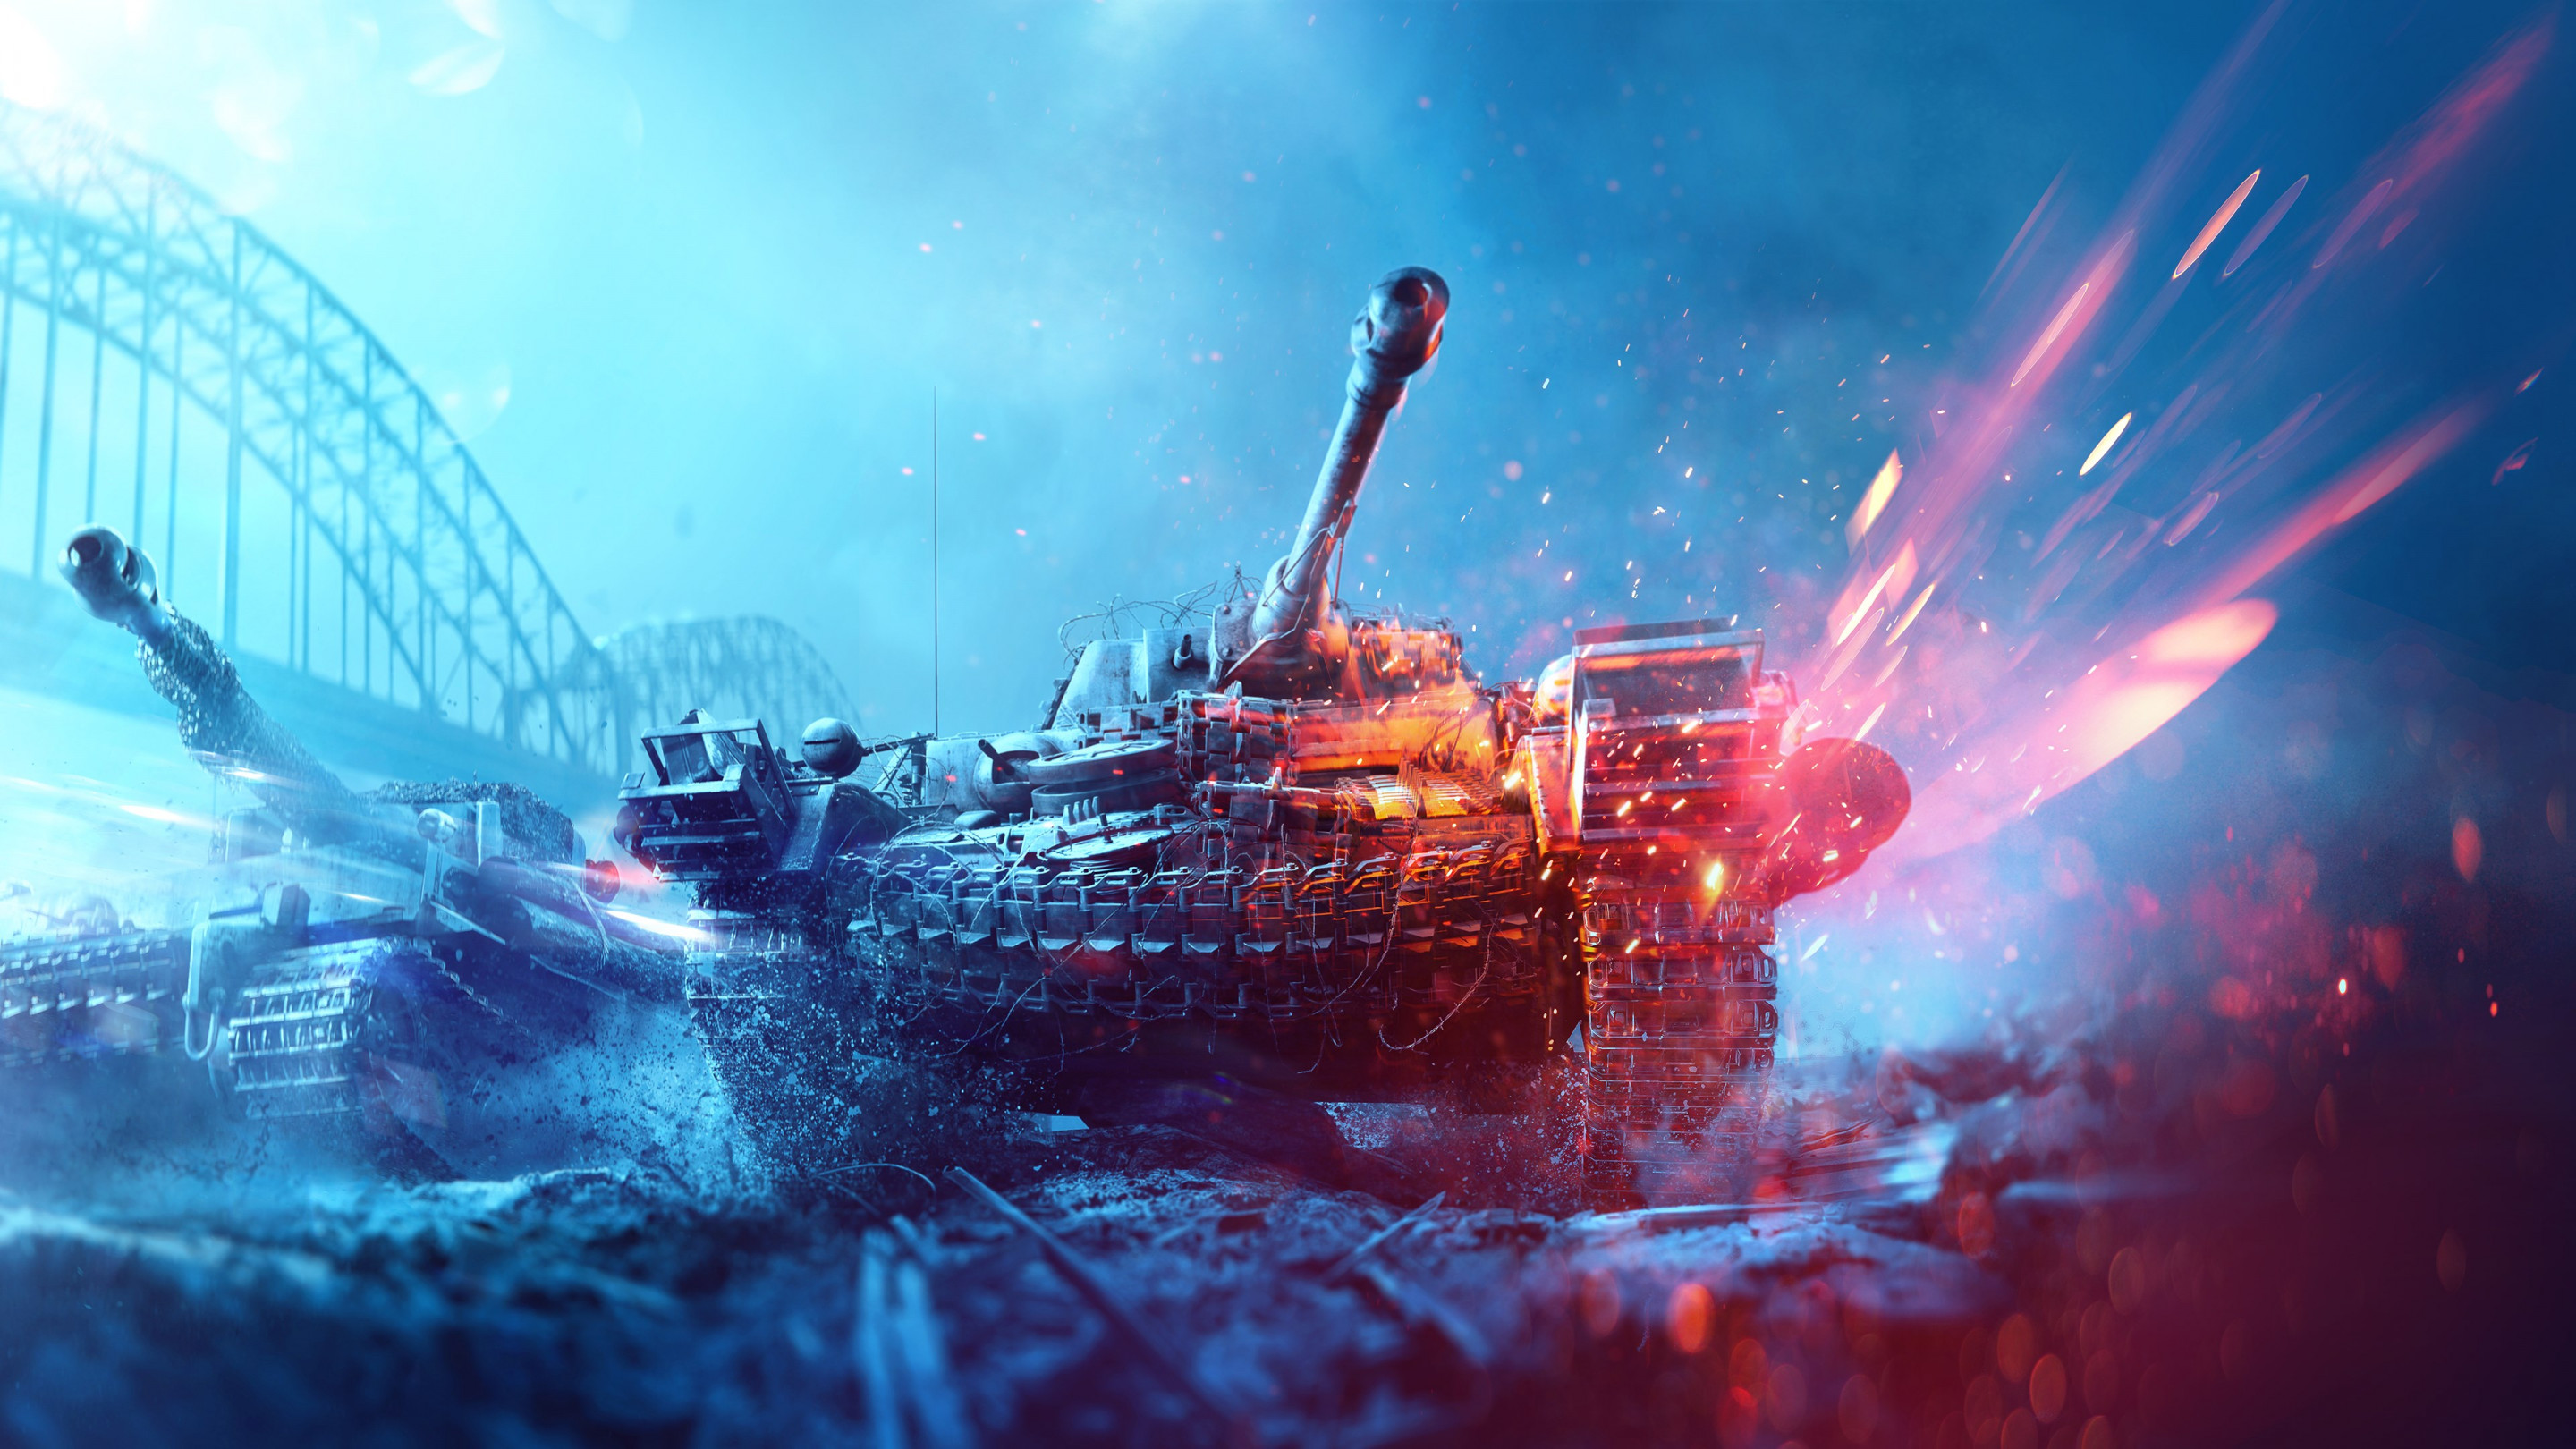 Battlefield 5 poster with tanks wallpaper 2880x1620